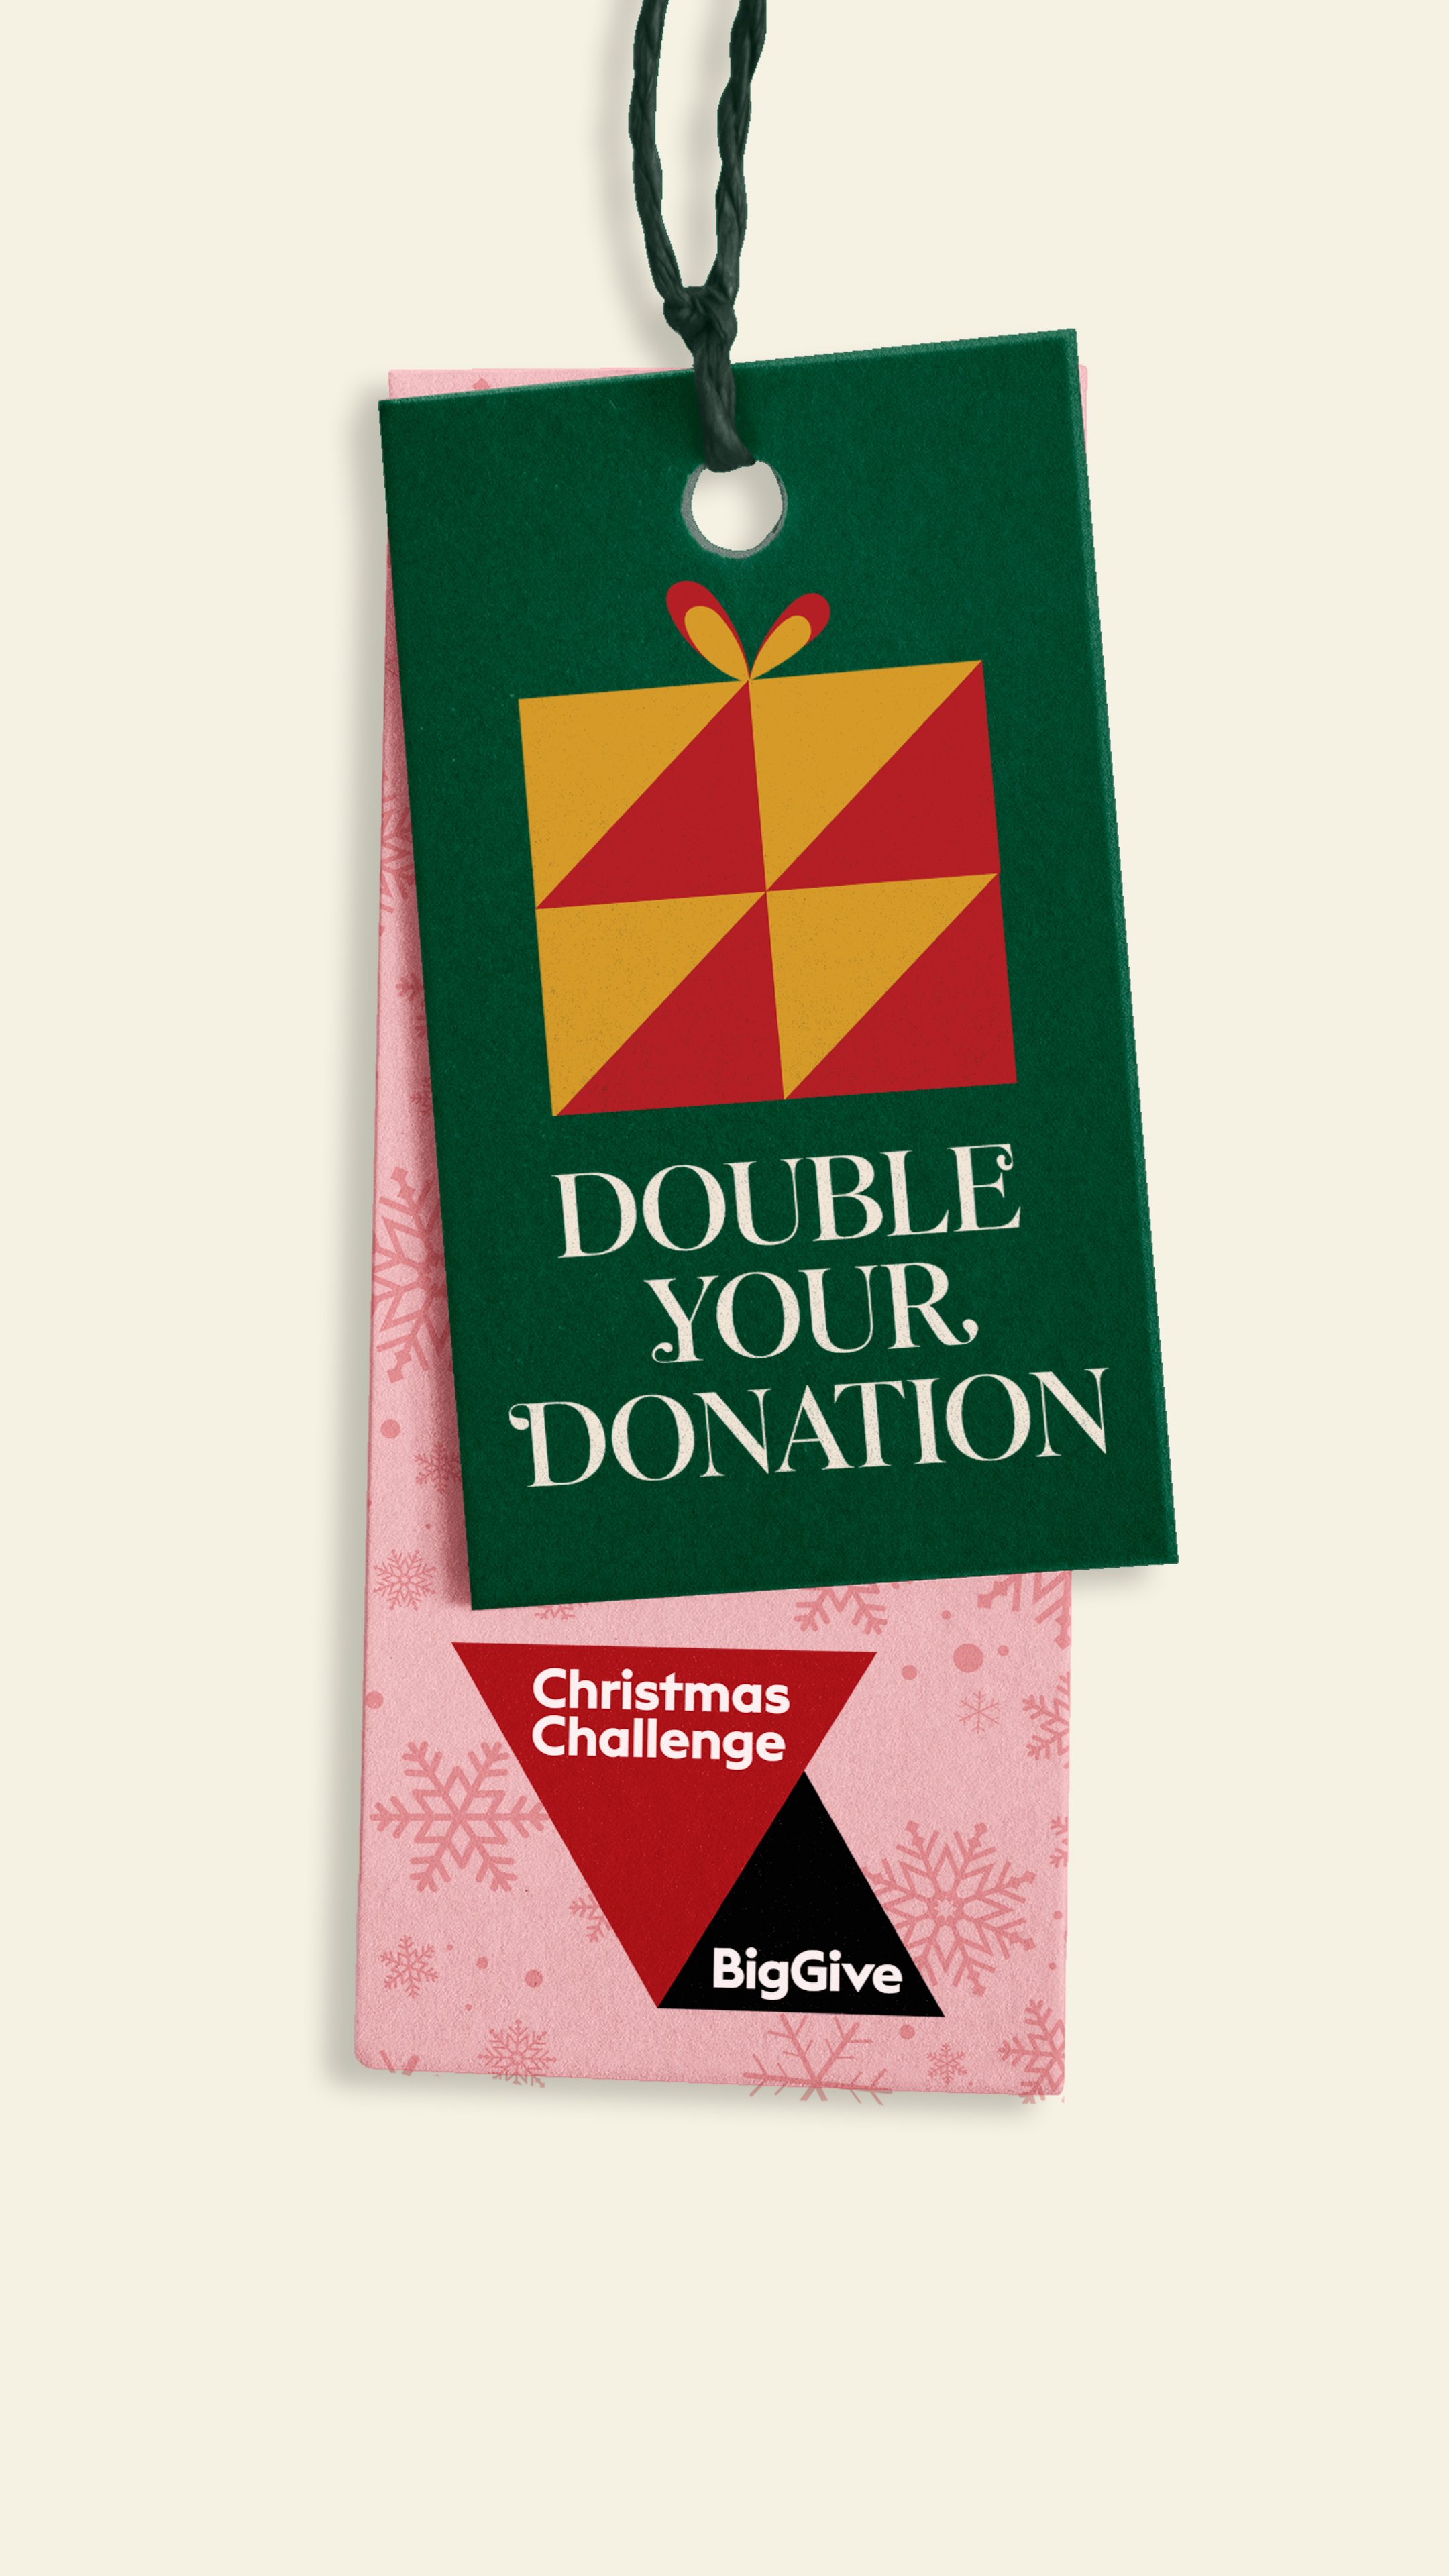 A gift tag in green with a square gift image in red and gold with the words 'double your donation'. Underneath is a pink tag with The Big Give logo in red and black